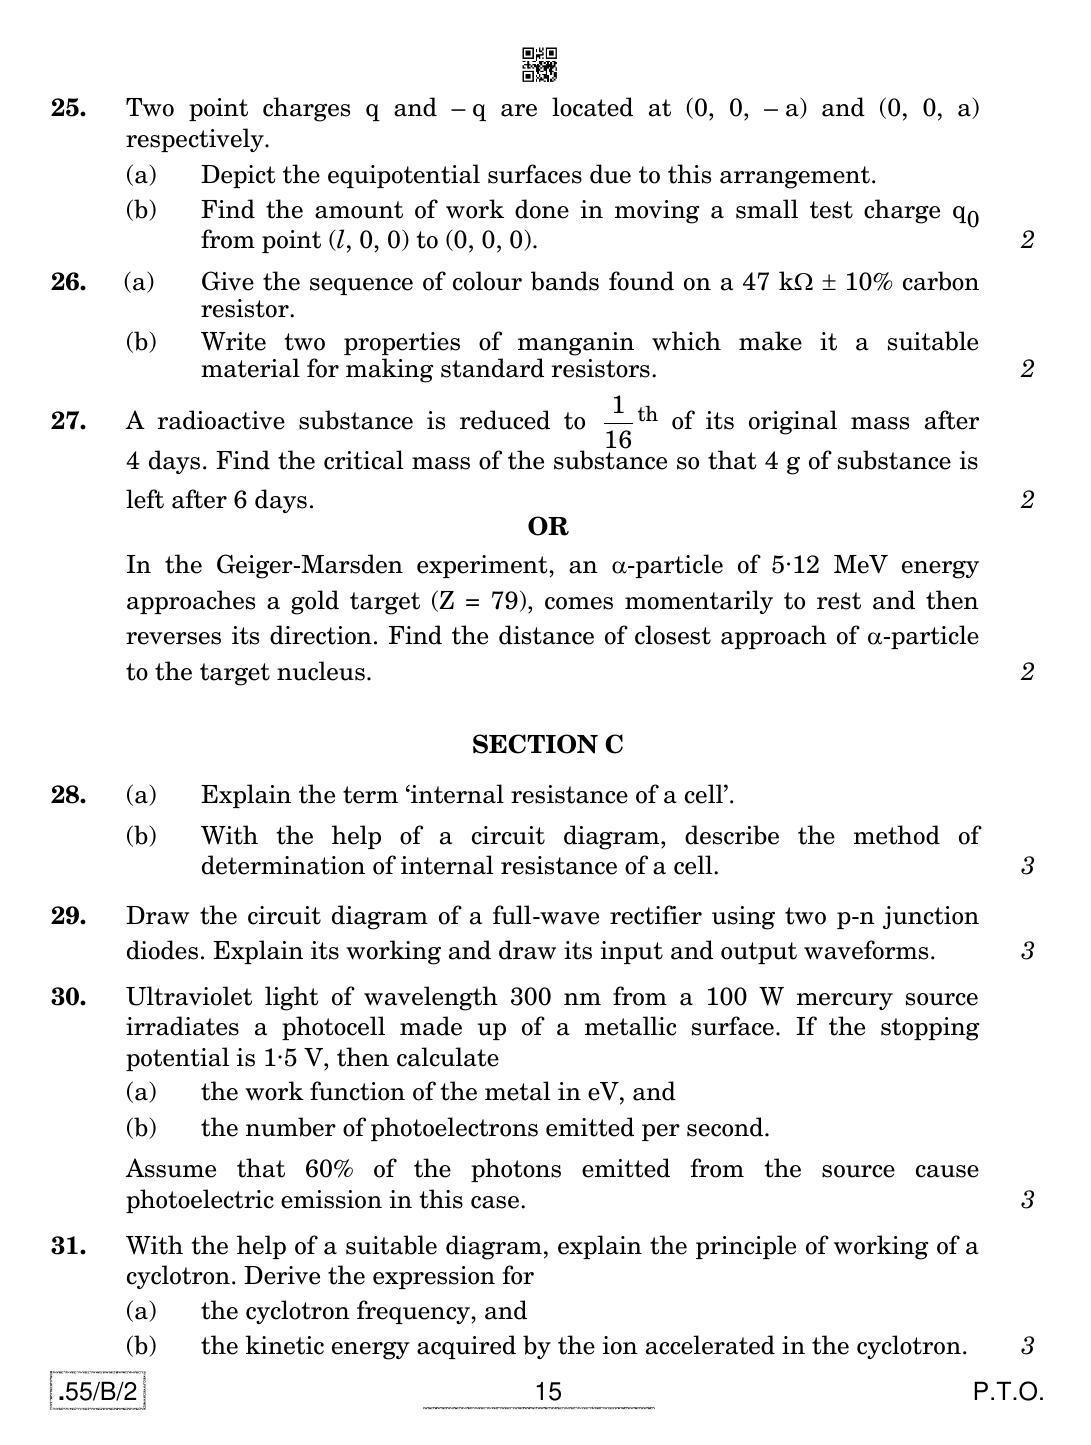 CBSE Class 12 55-C-2 - Physics 2020 Compartment Question Paper - Page 15